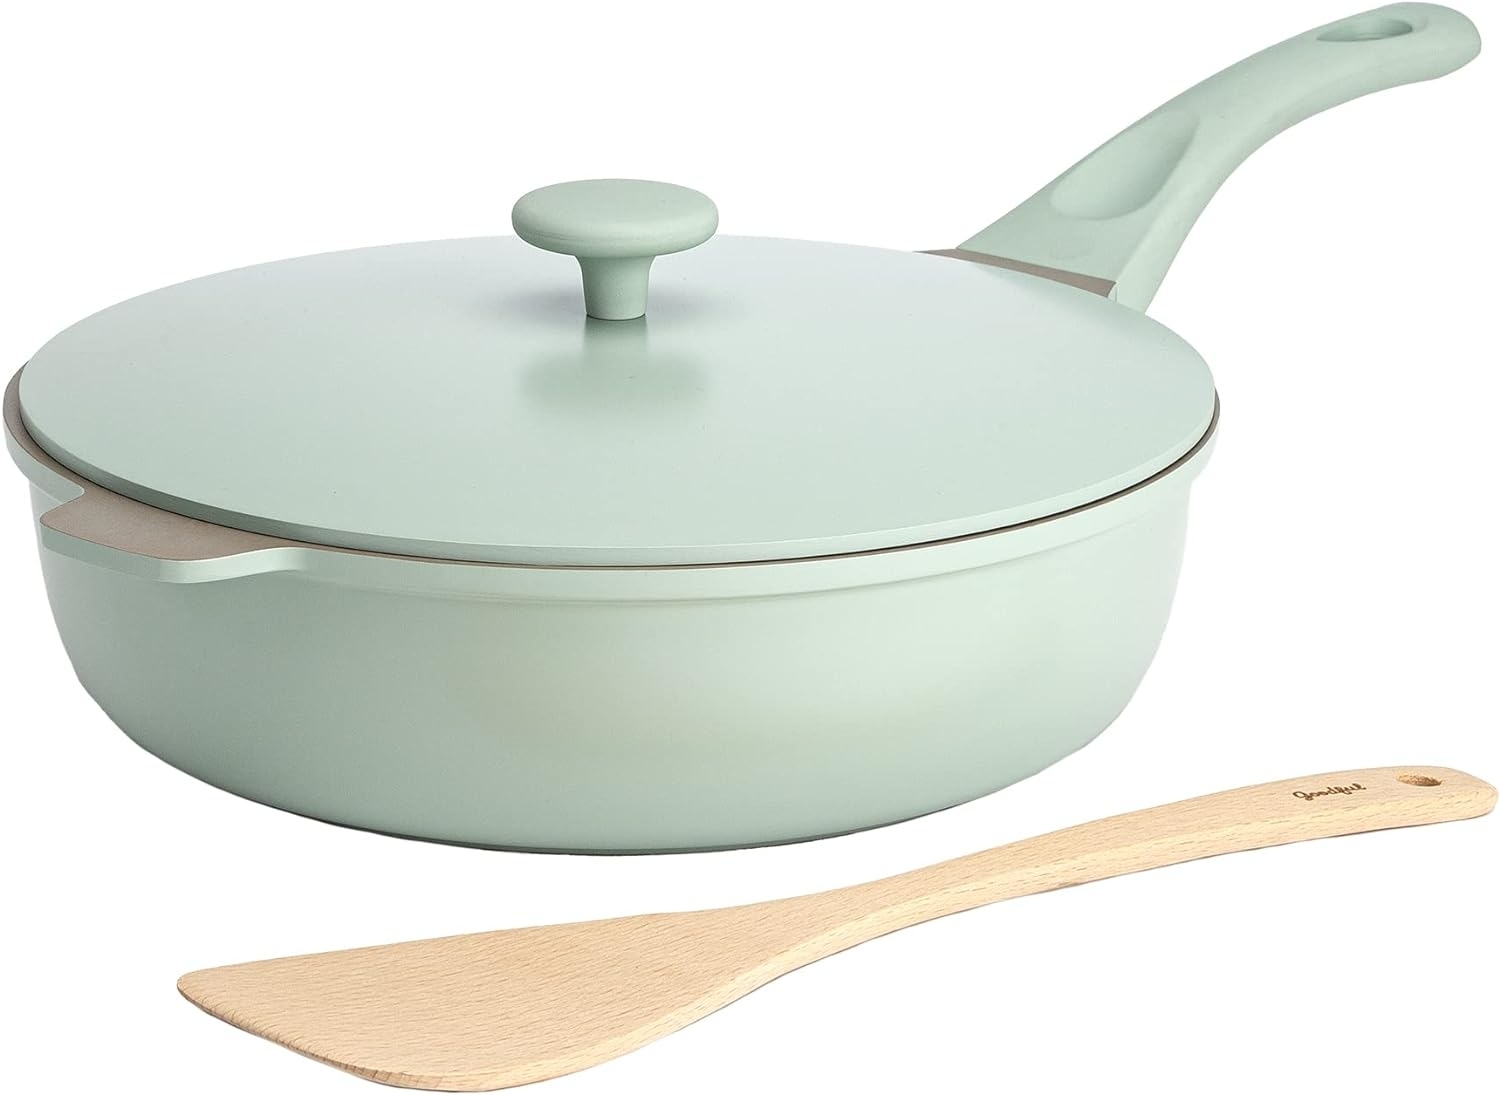 sage green all-in-one Goodful pan